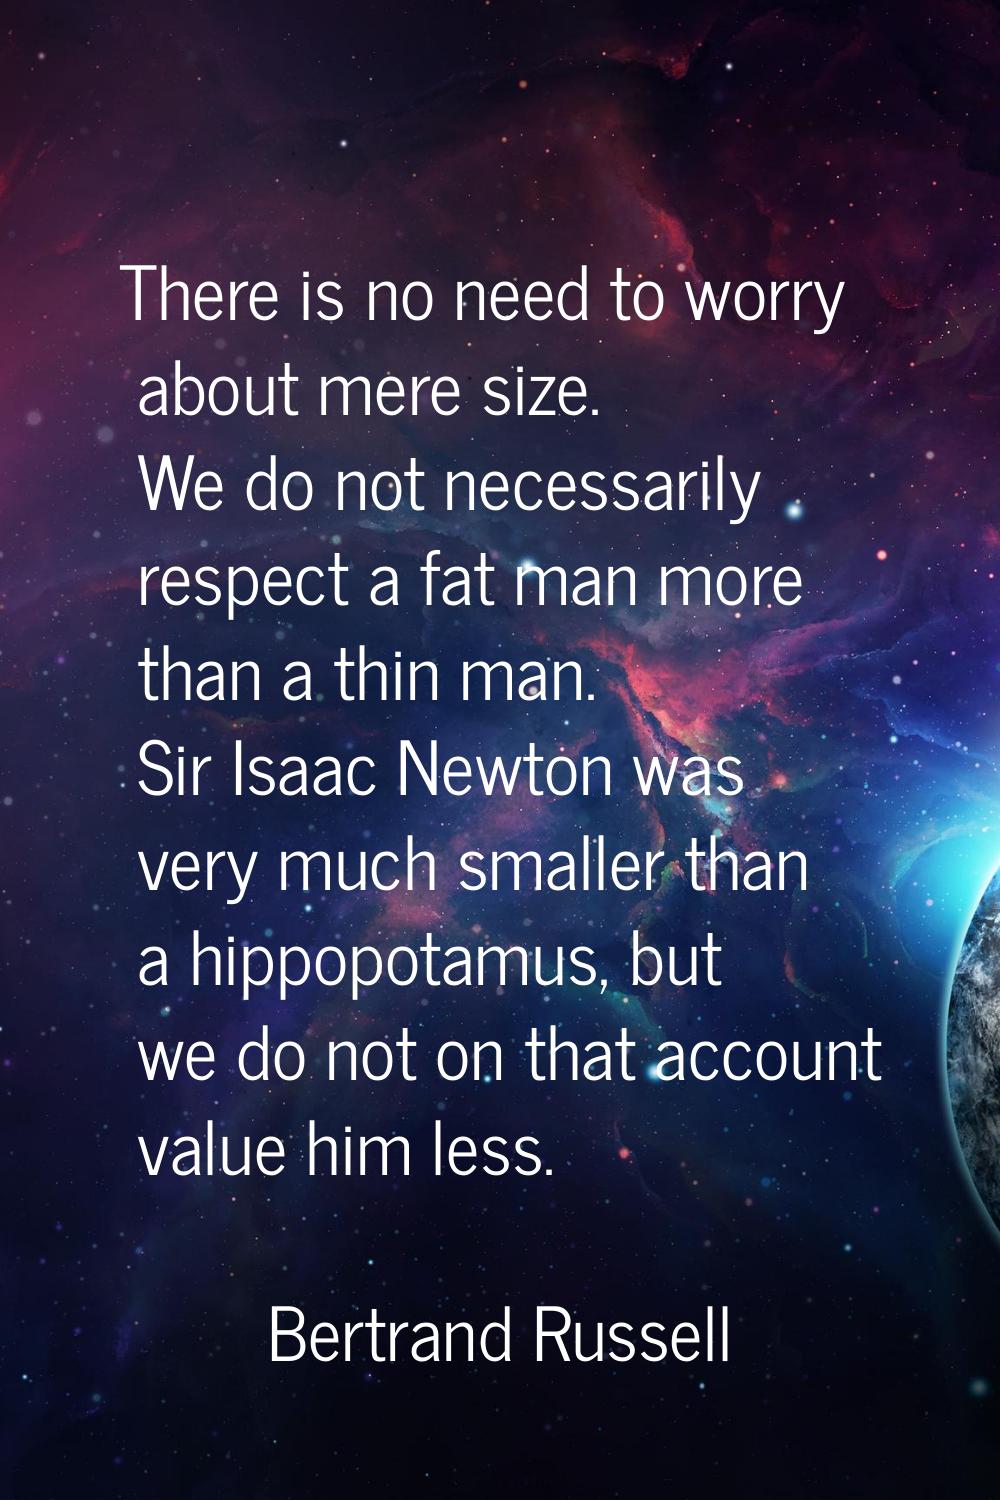 There is no need to worry about mere size. We do not necessarily respect a fat man more than a thin